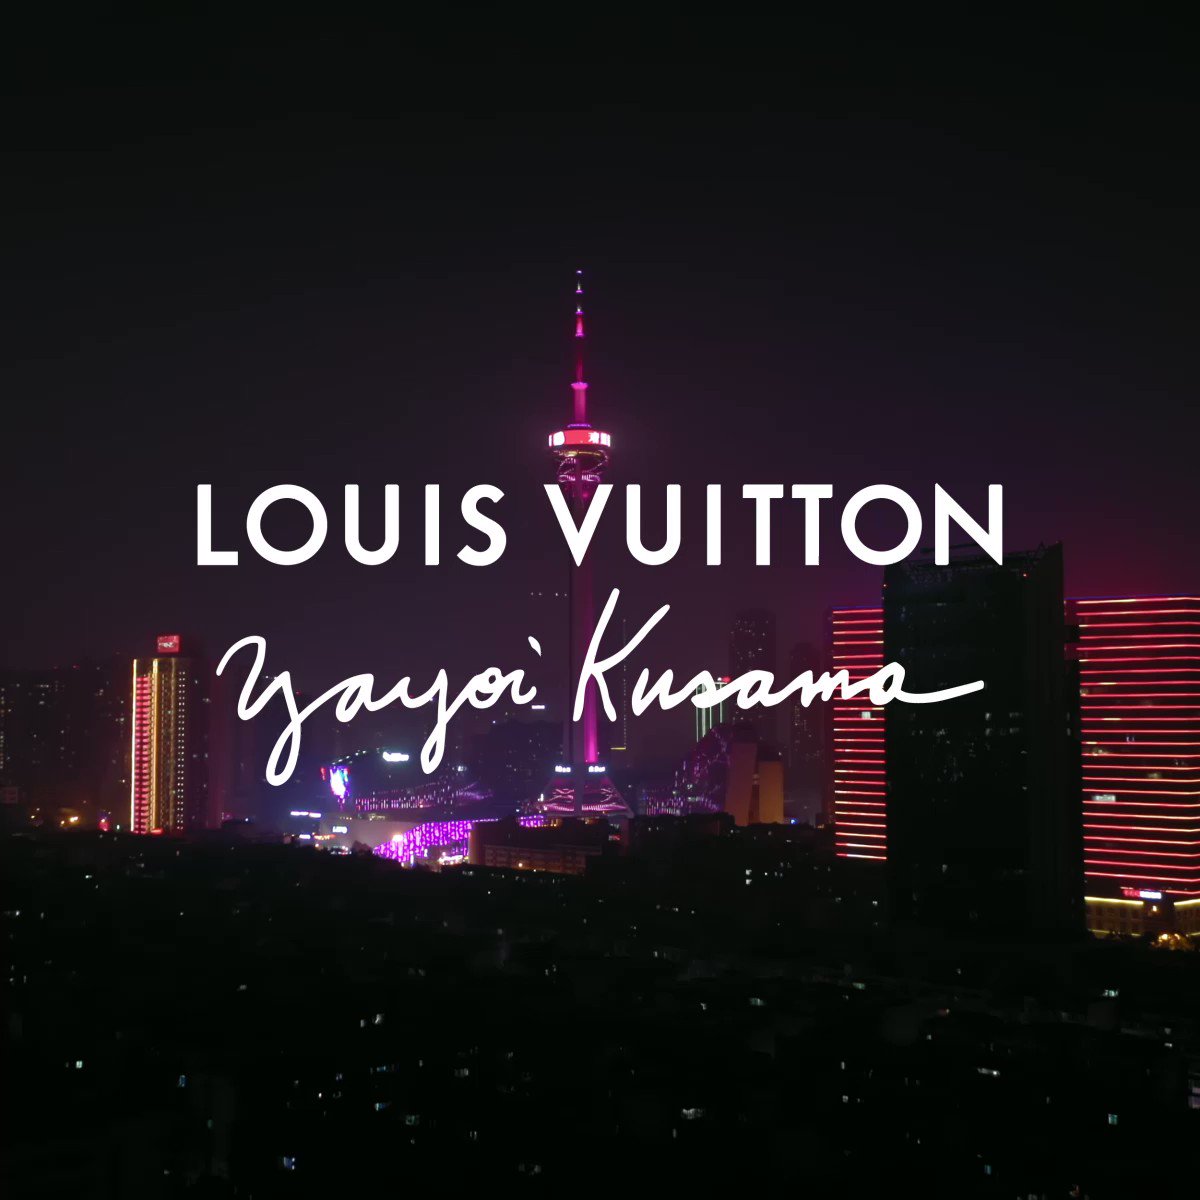 Louis Vuitton on X: #LVxYayoiKusama around the globe. Iconic locations in  New York, Chengdu, London, and Hangzhou are transformed with  hyper-realistic 3D anamorphic imagery. Discover more from the #LouisVuitton  and #YayoiKusama collaboration